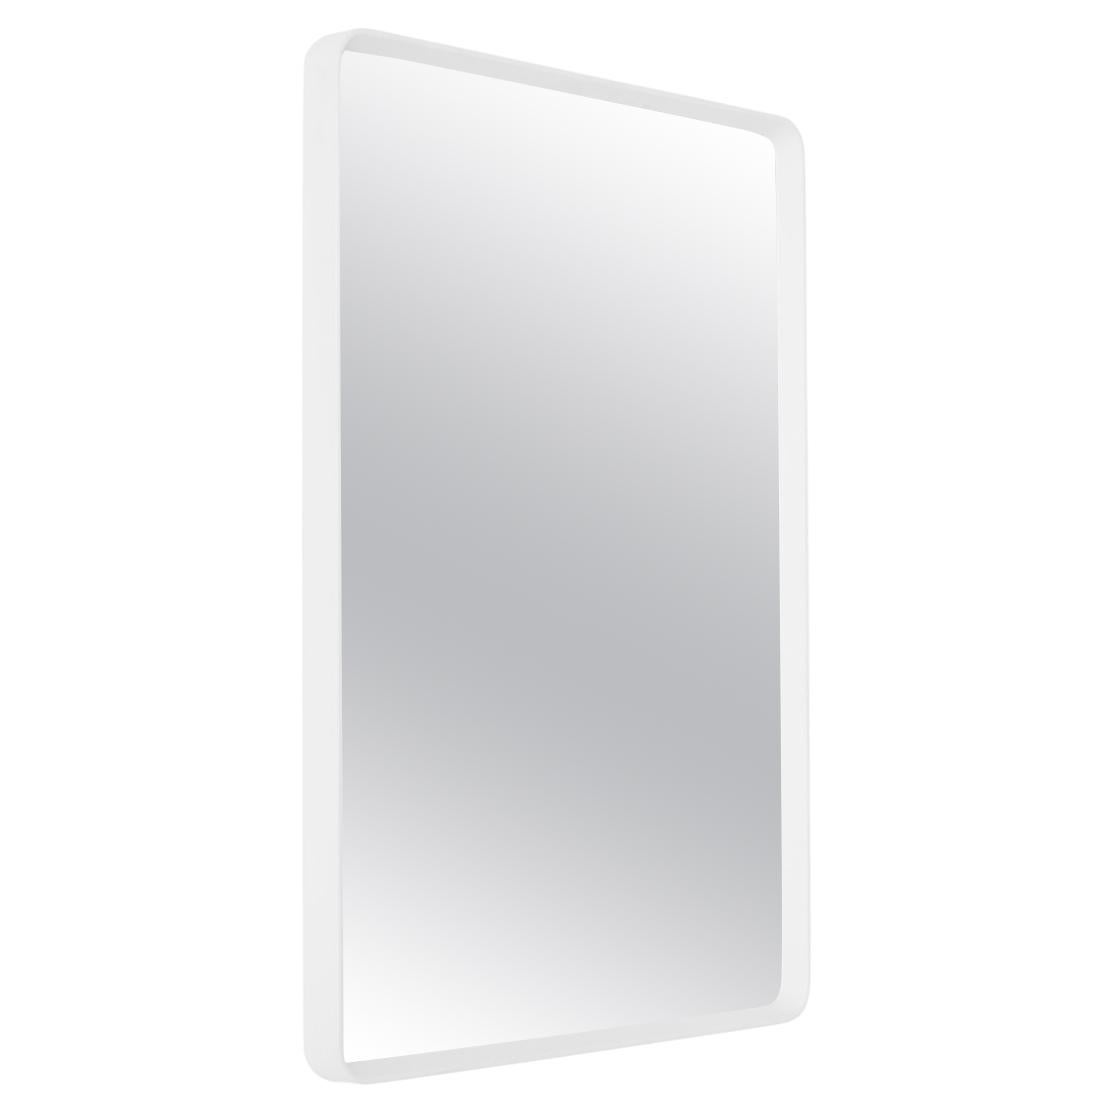 Norm Wall Mirror, White For Sale